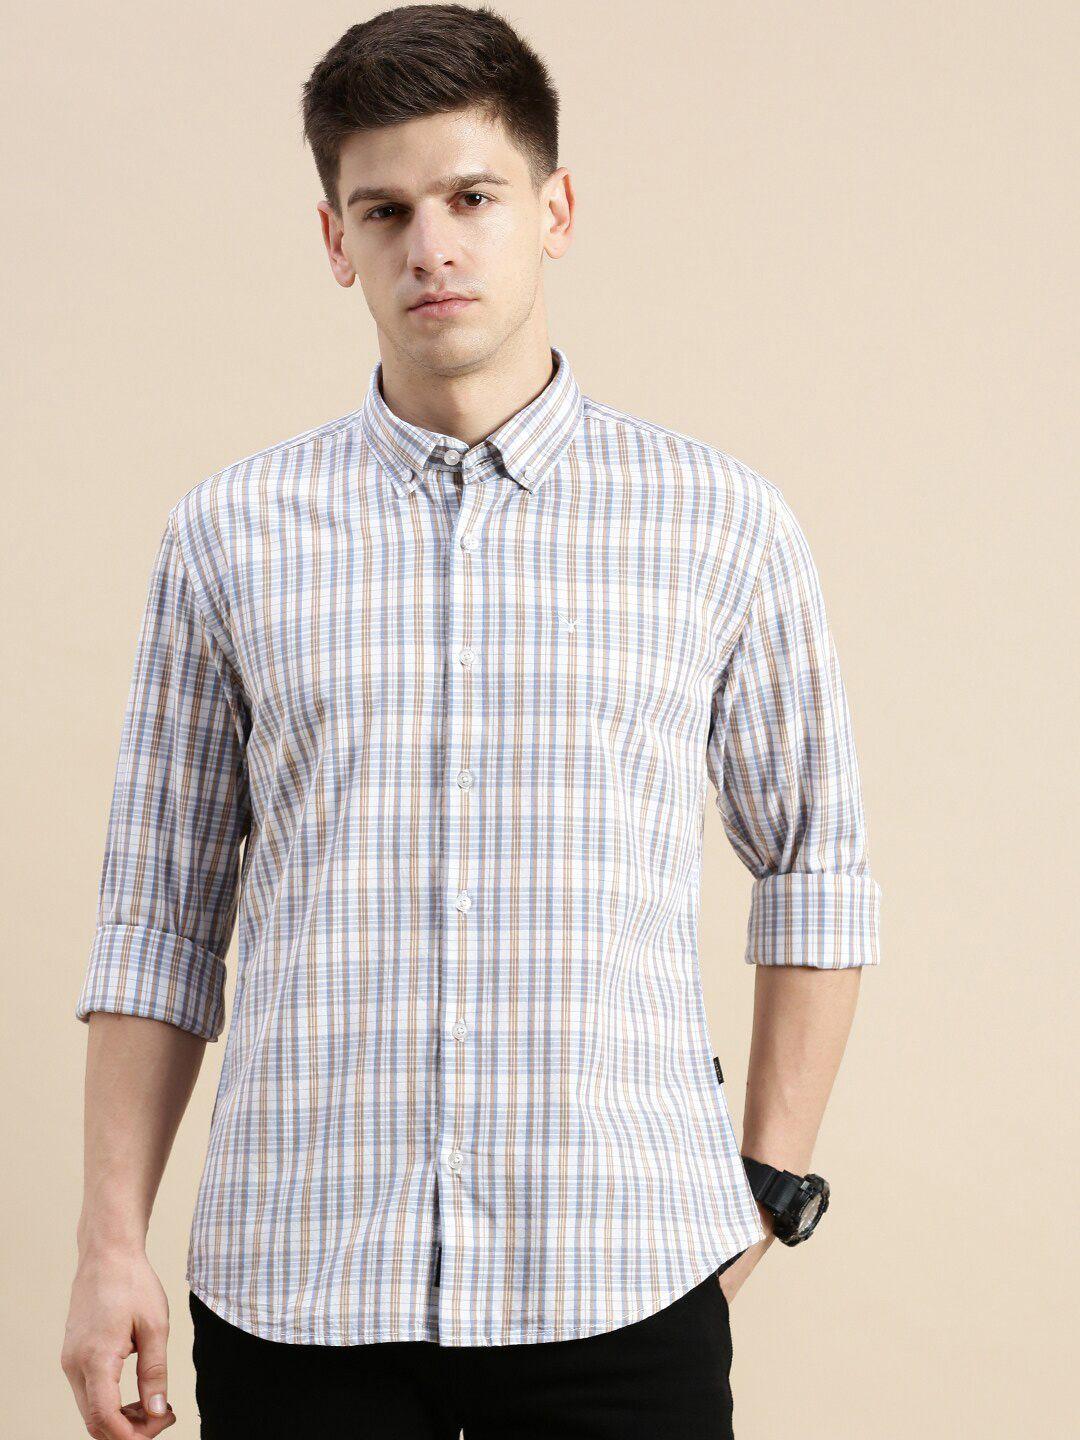 showoff-standard-slim-fit-vertical-checks-checked-cotton-casual-shirt